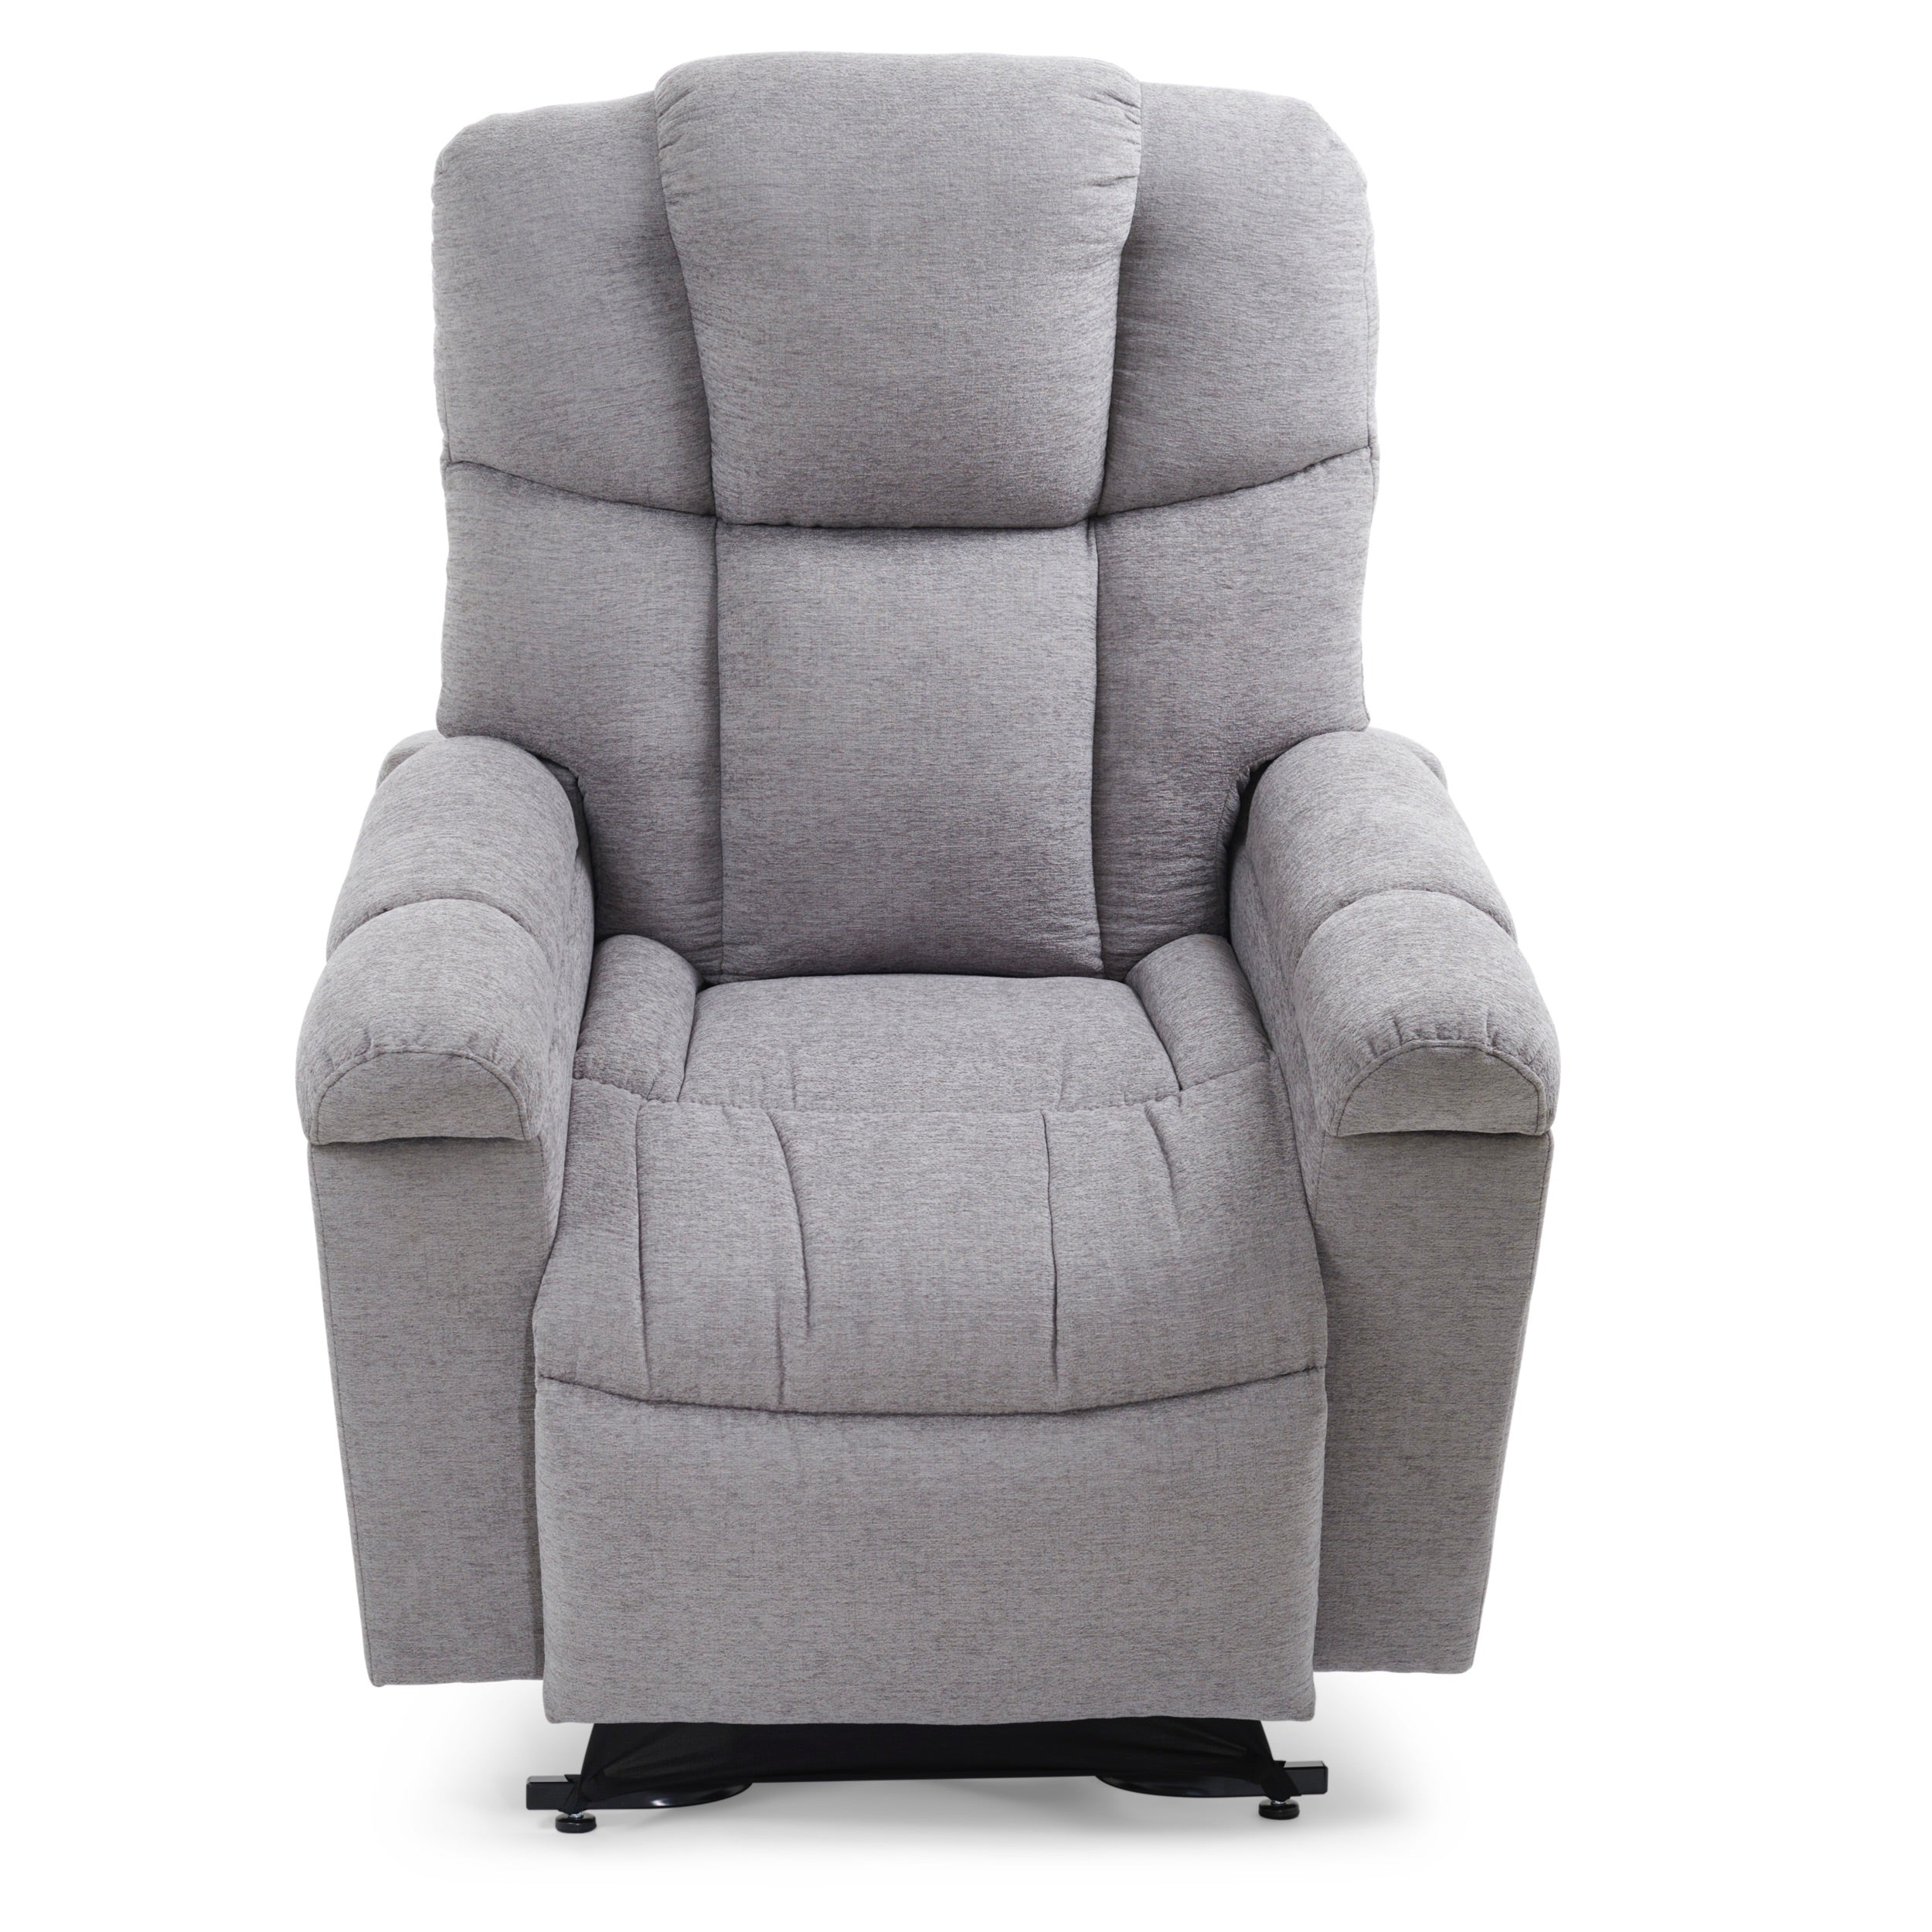 Front view of Rigel power lift chair recliner, anchor color